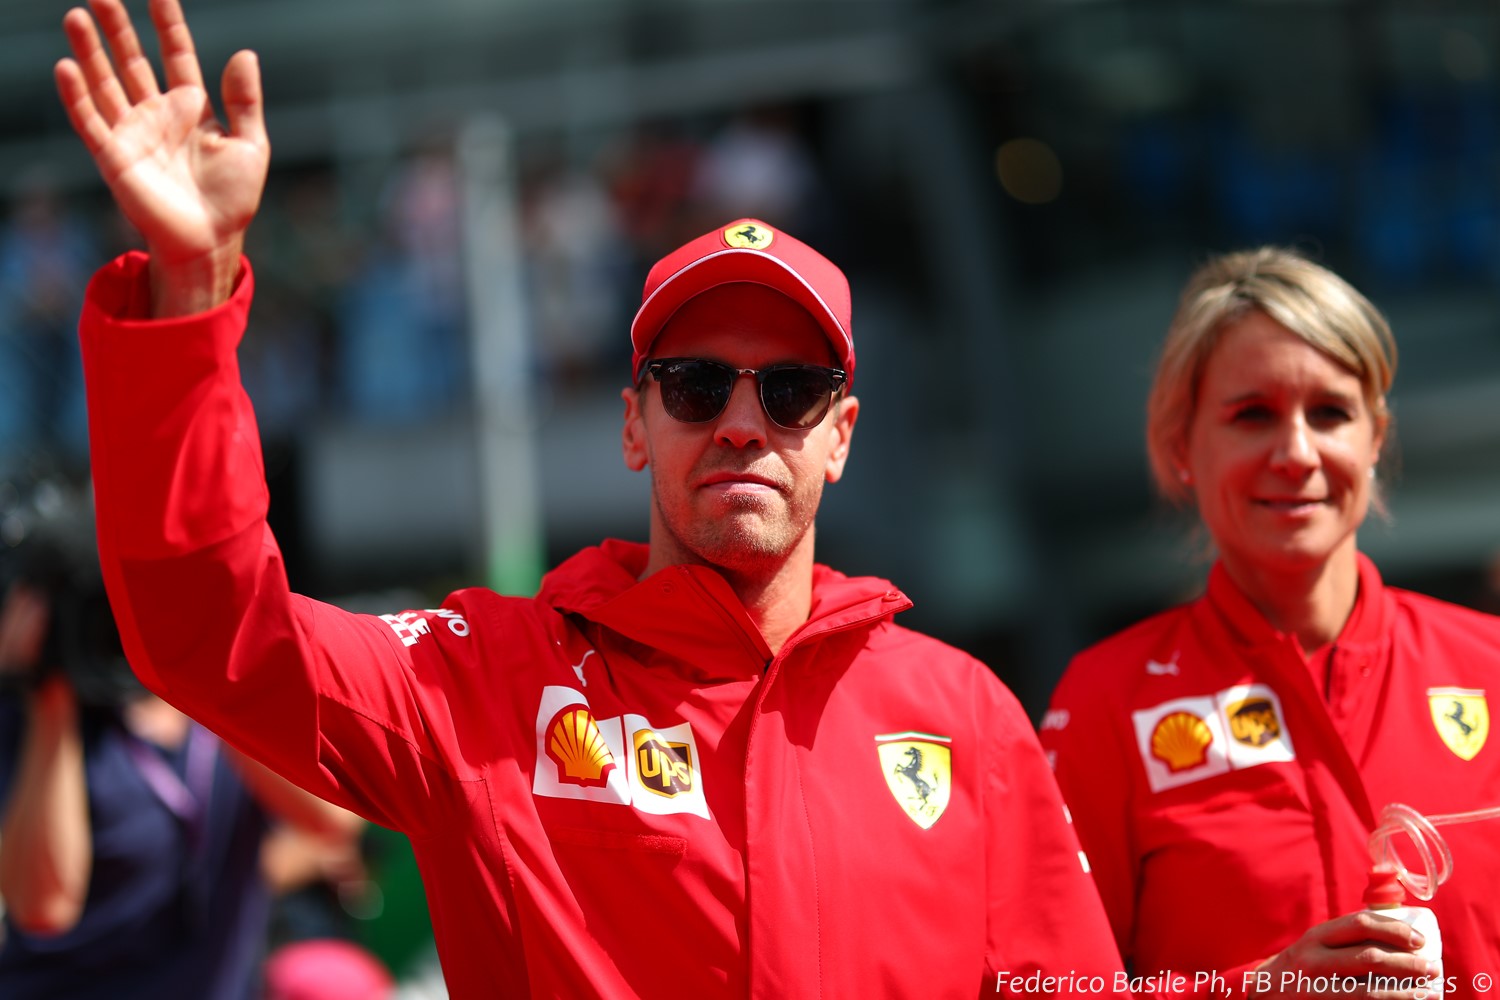 It is time for Sebastian Vettel to hang it up. He was destroyed by Daniel Ricciardo ay Red Bull and he is now being destroyed by Charles Leclerc at Ferrari